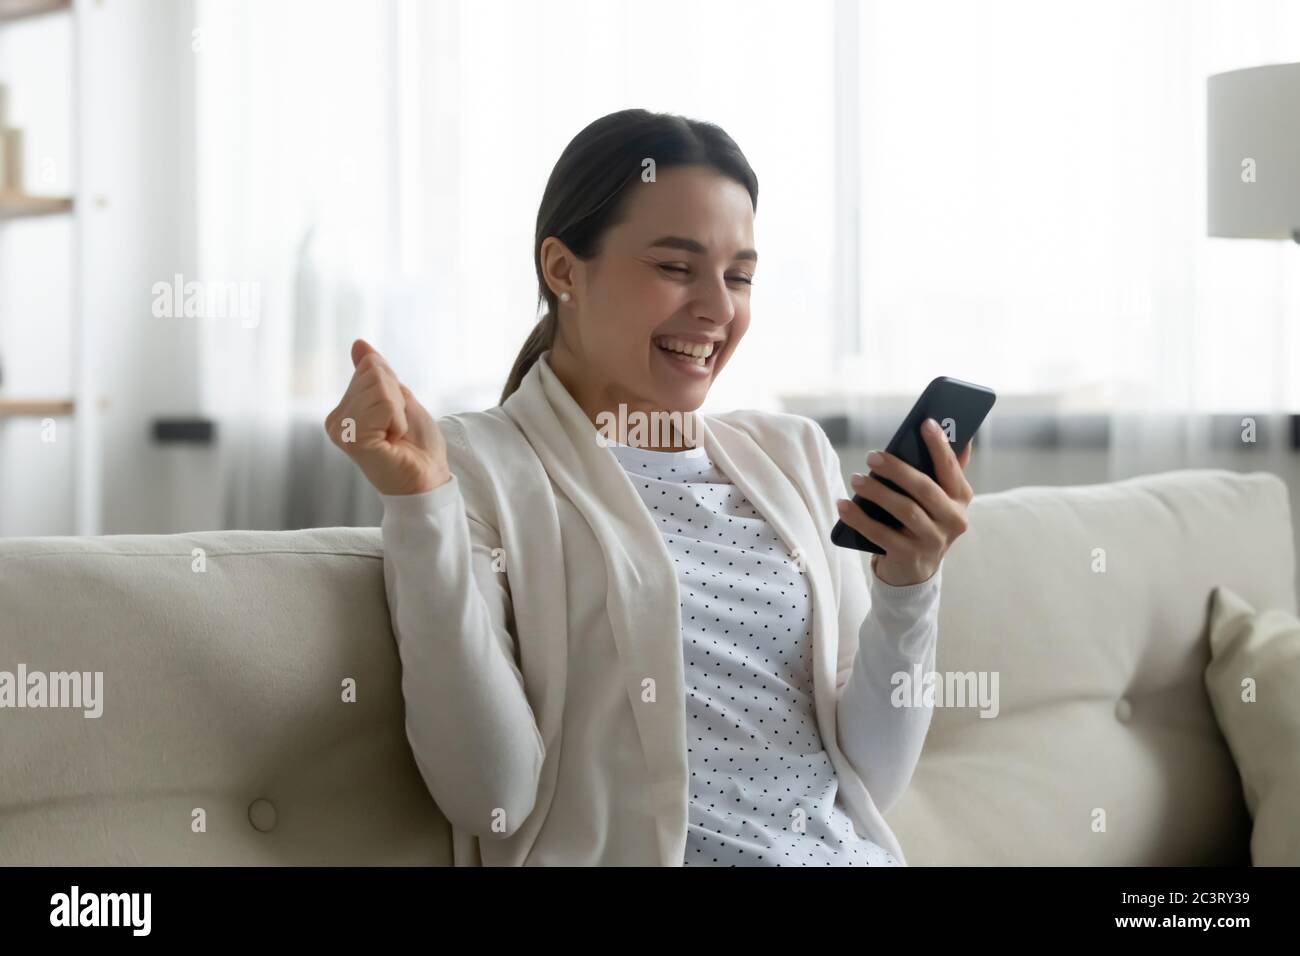 Woman looking at cellphone screen got fantastic offer feels happy Stock Photo